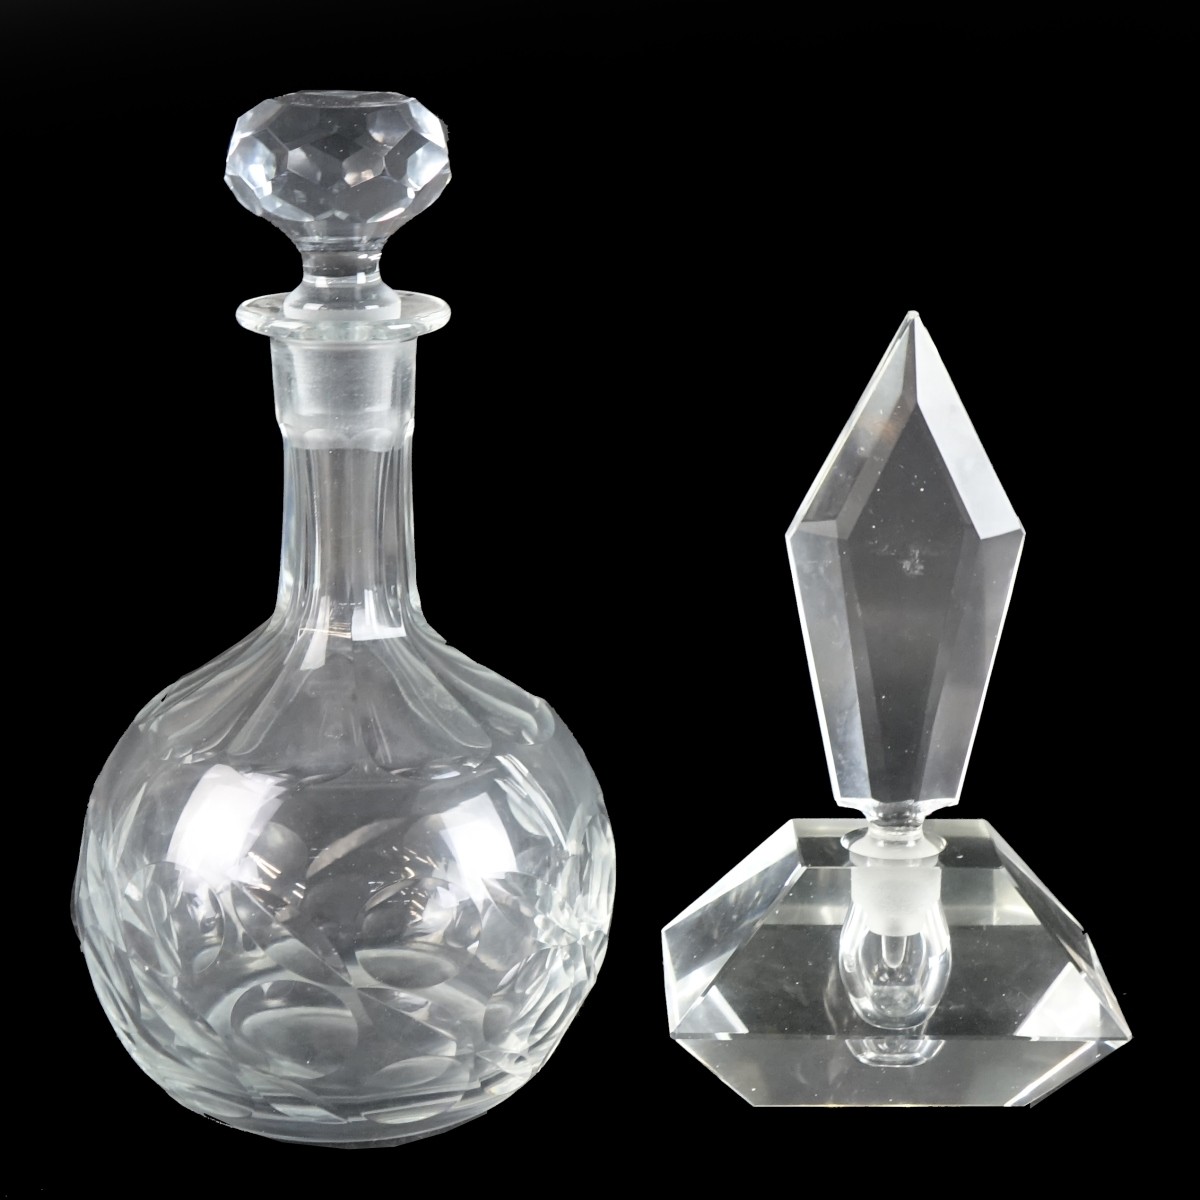 Decanter and Perfume Bottle